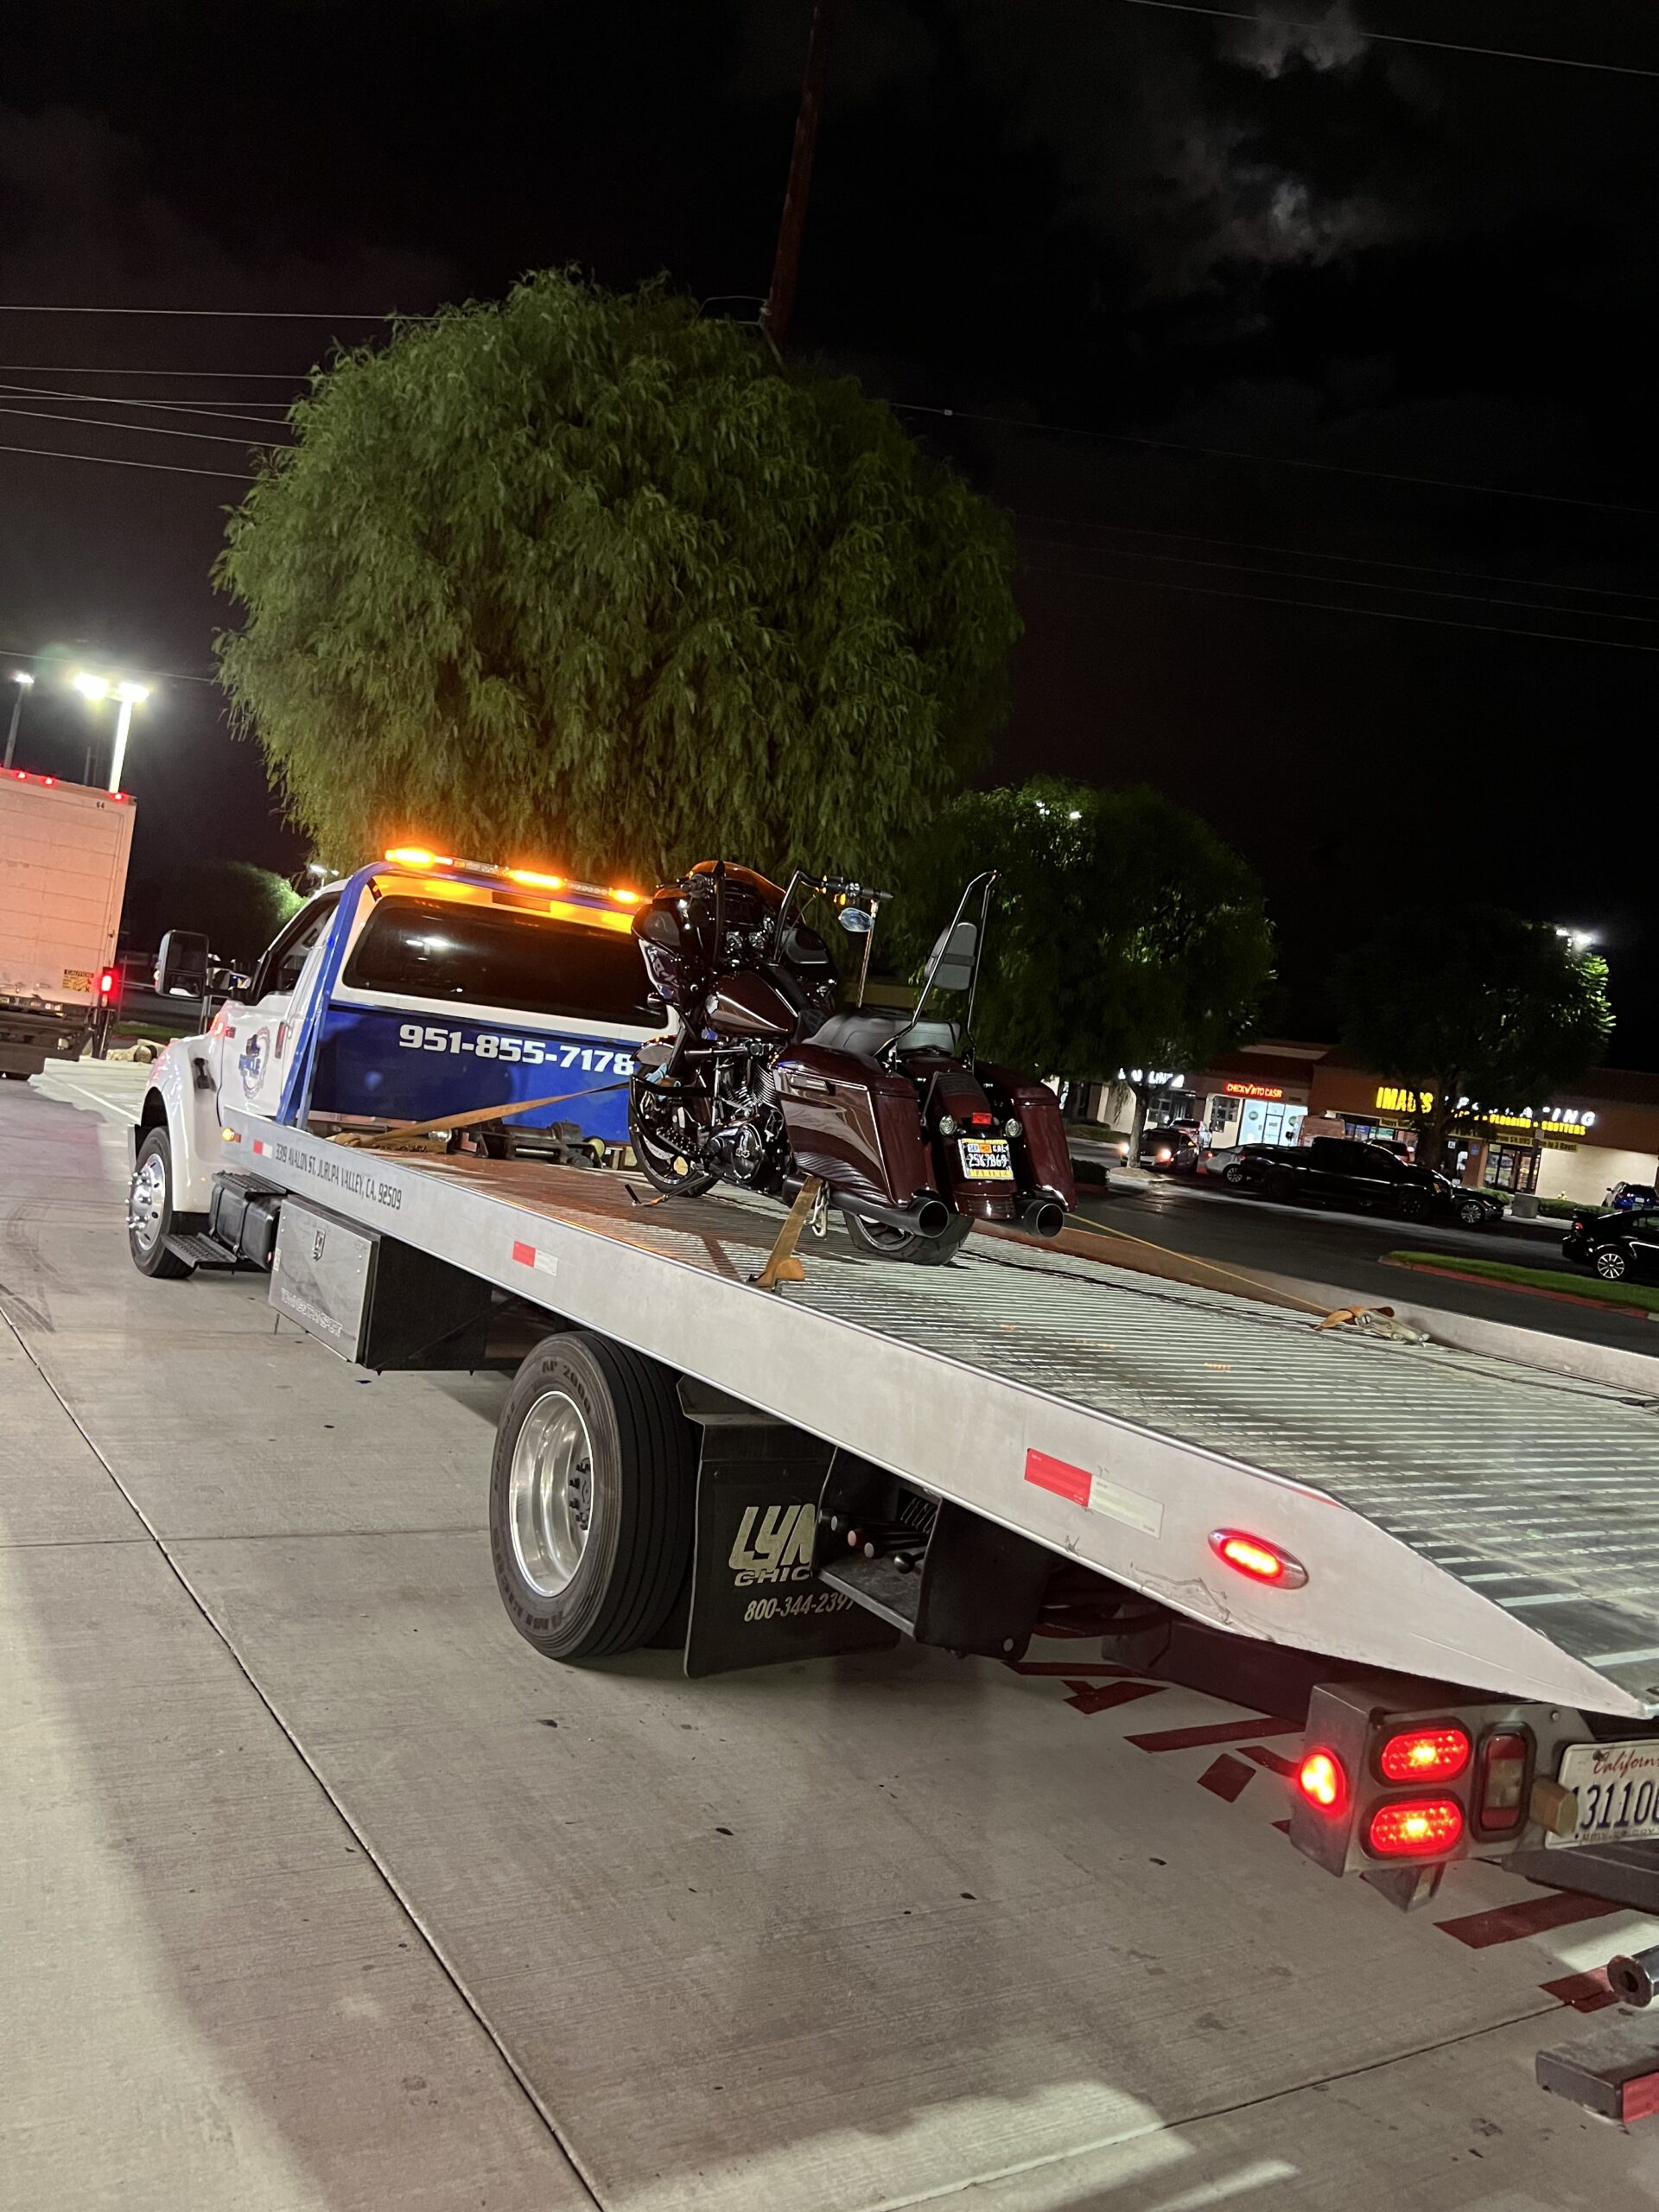 Rescue Towing Service – Towing Service Riverside, CA